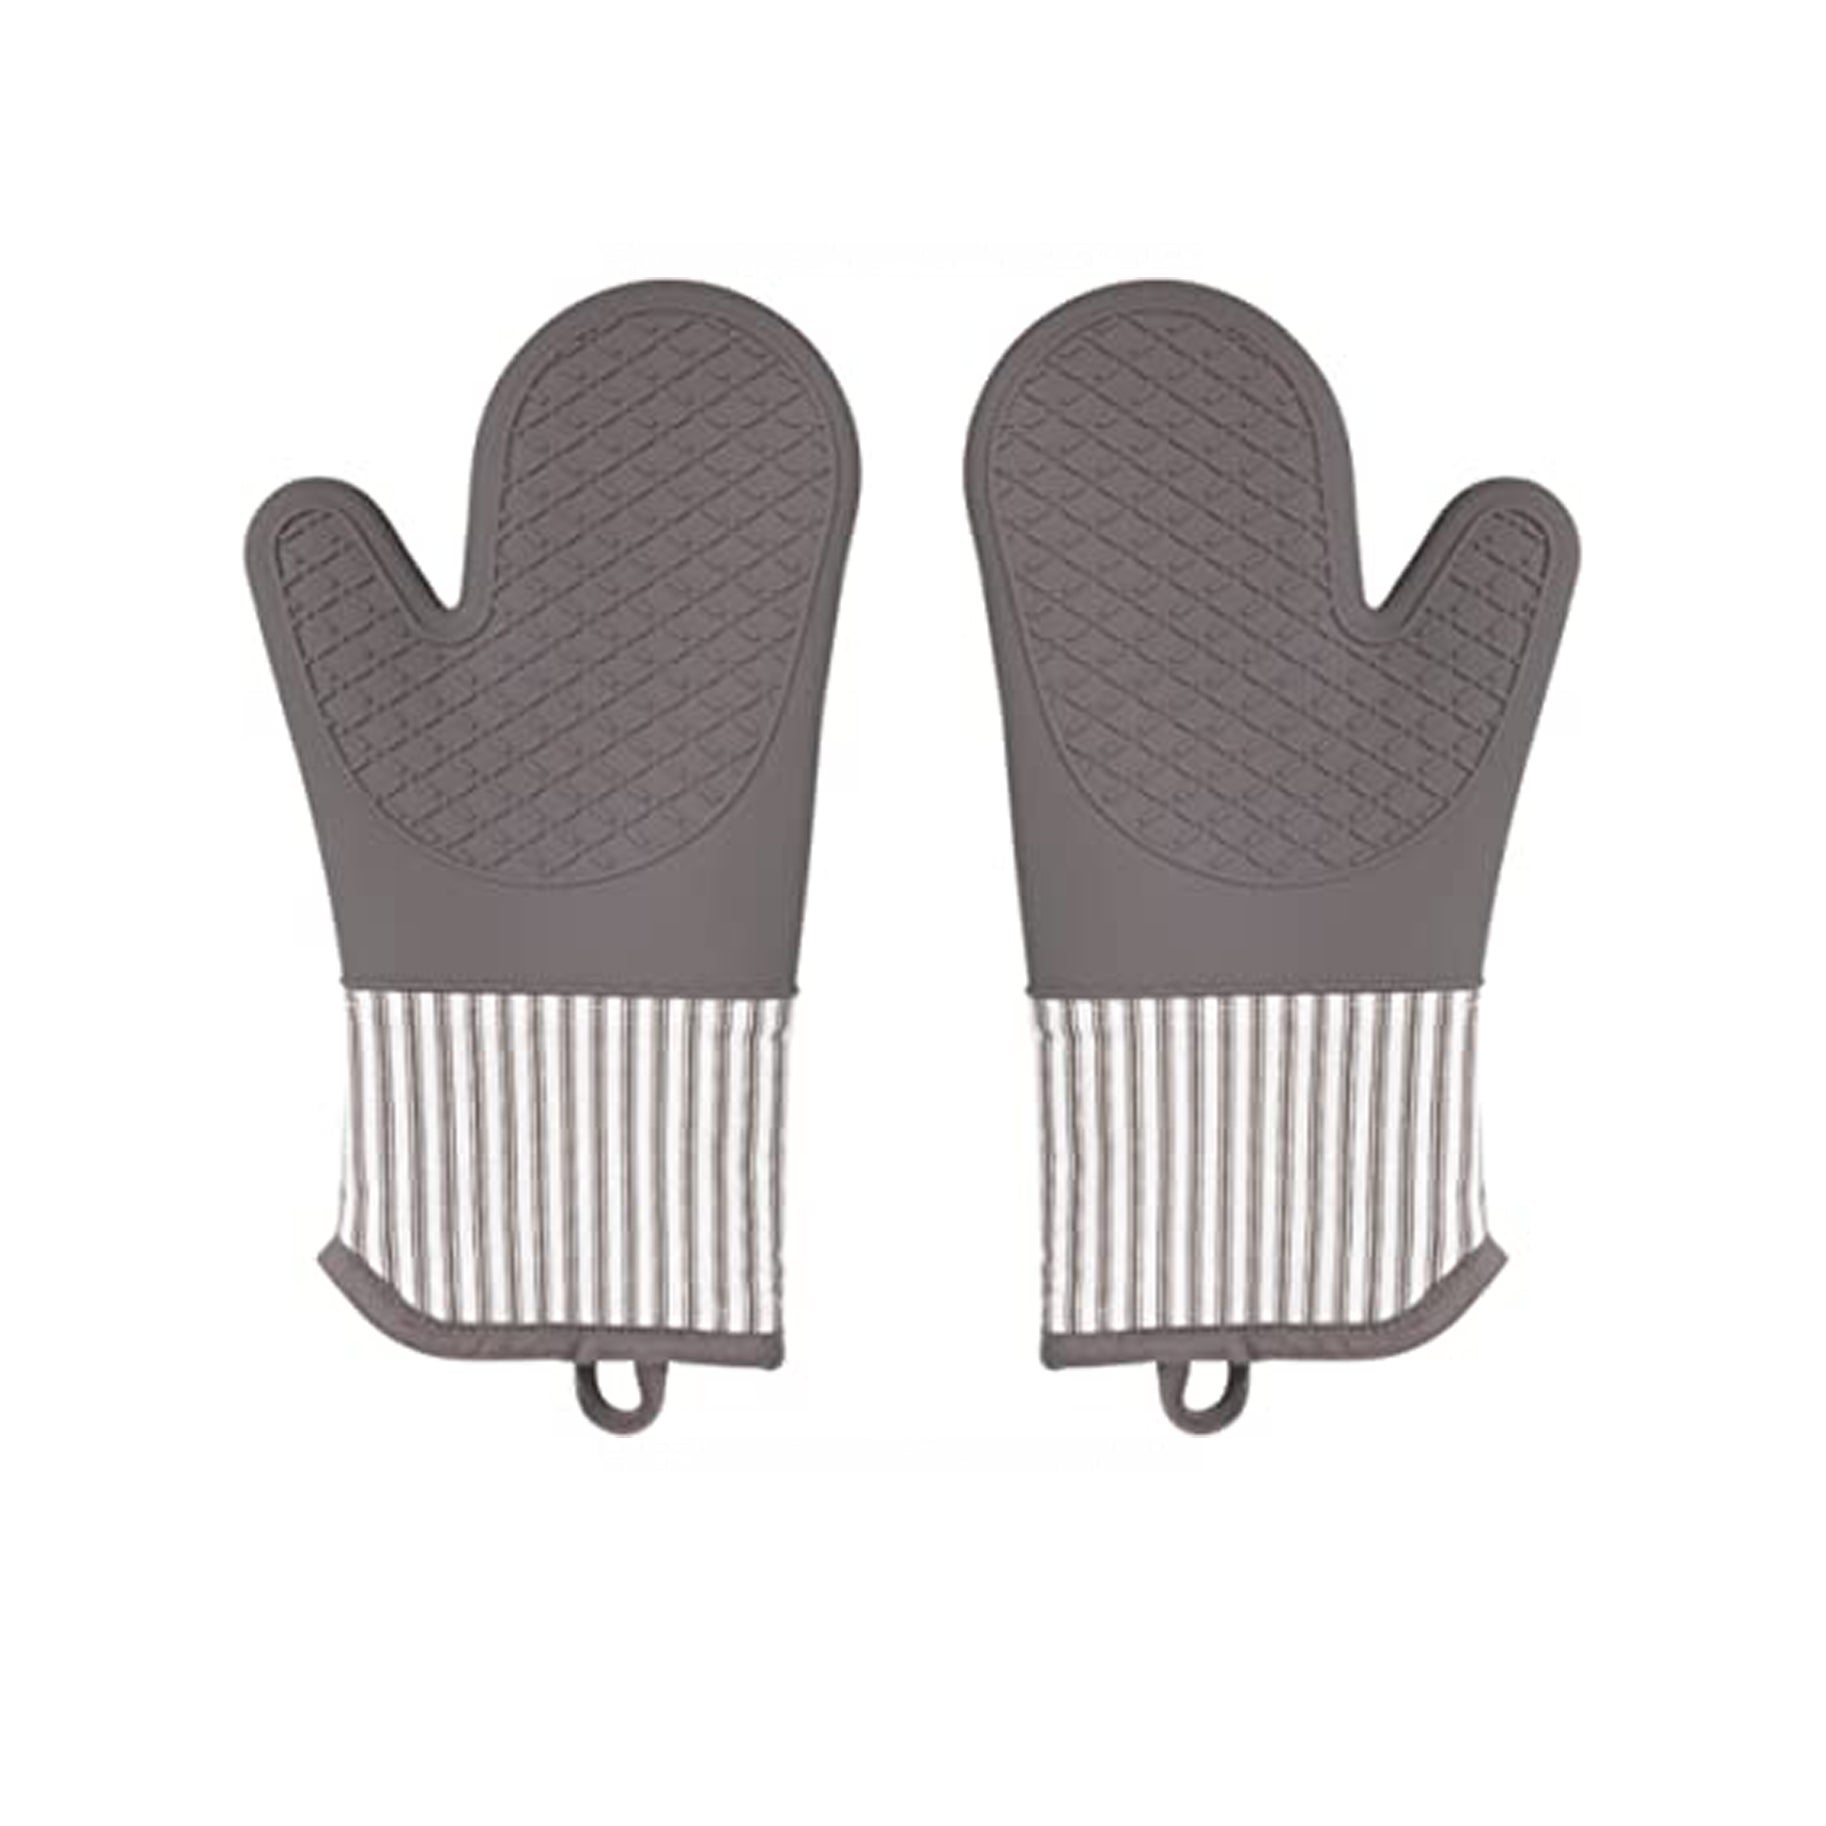 Chef Approved 167315 Oven Mits 15 One Size Fits Most